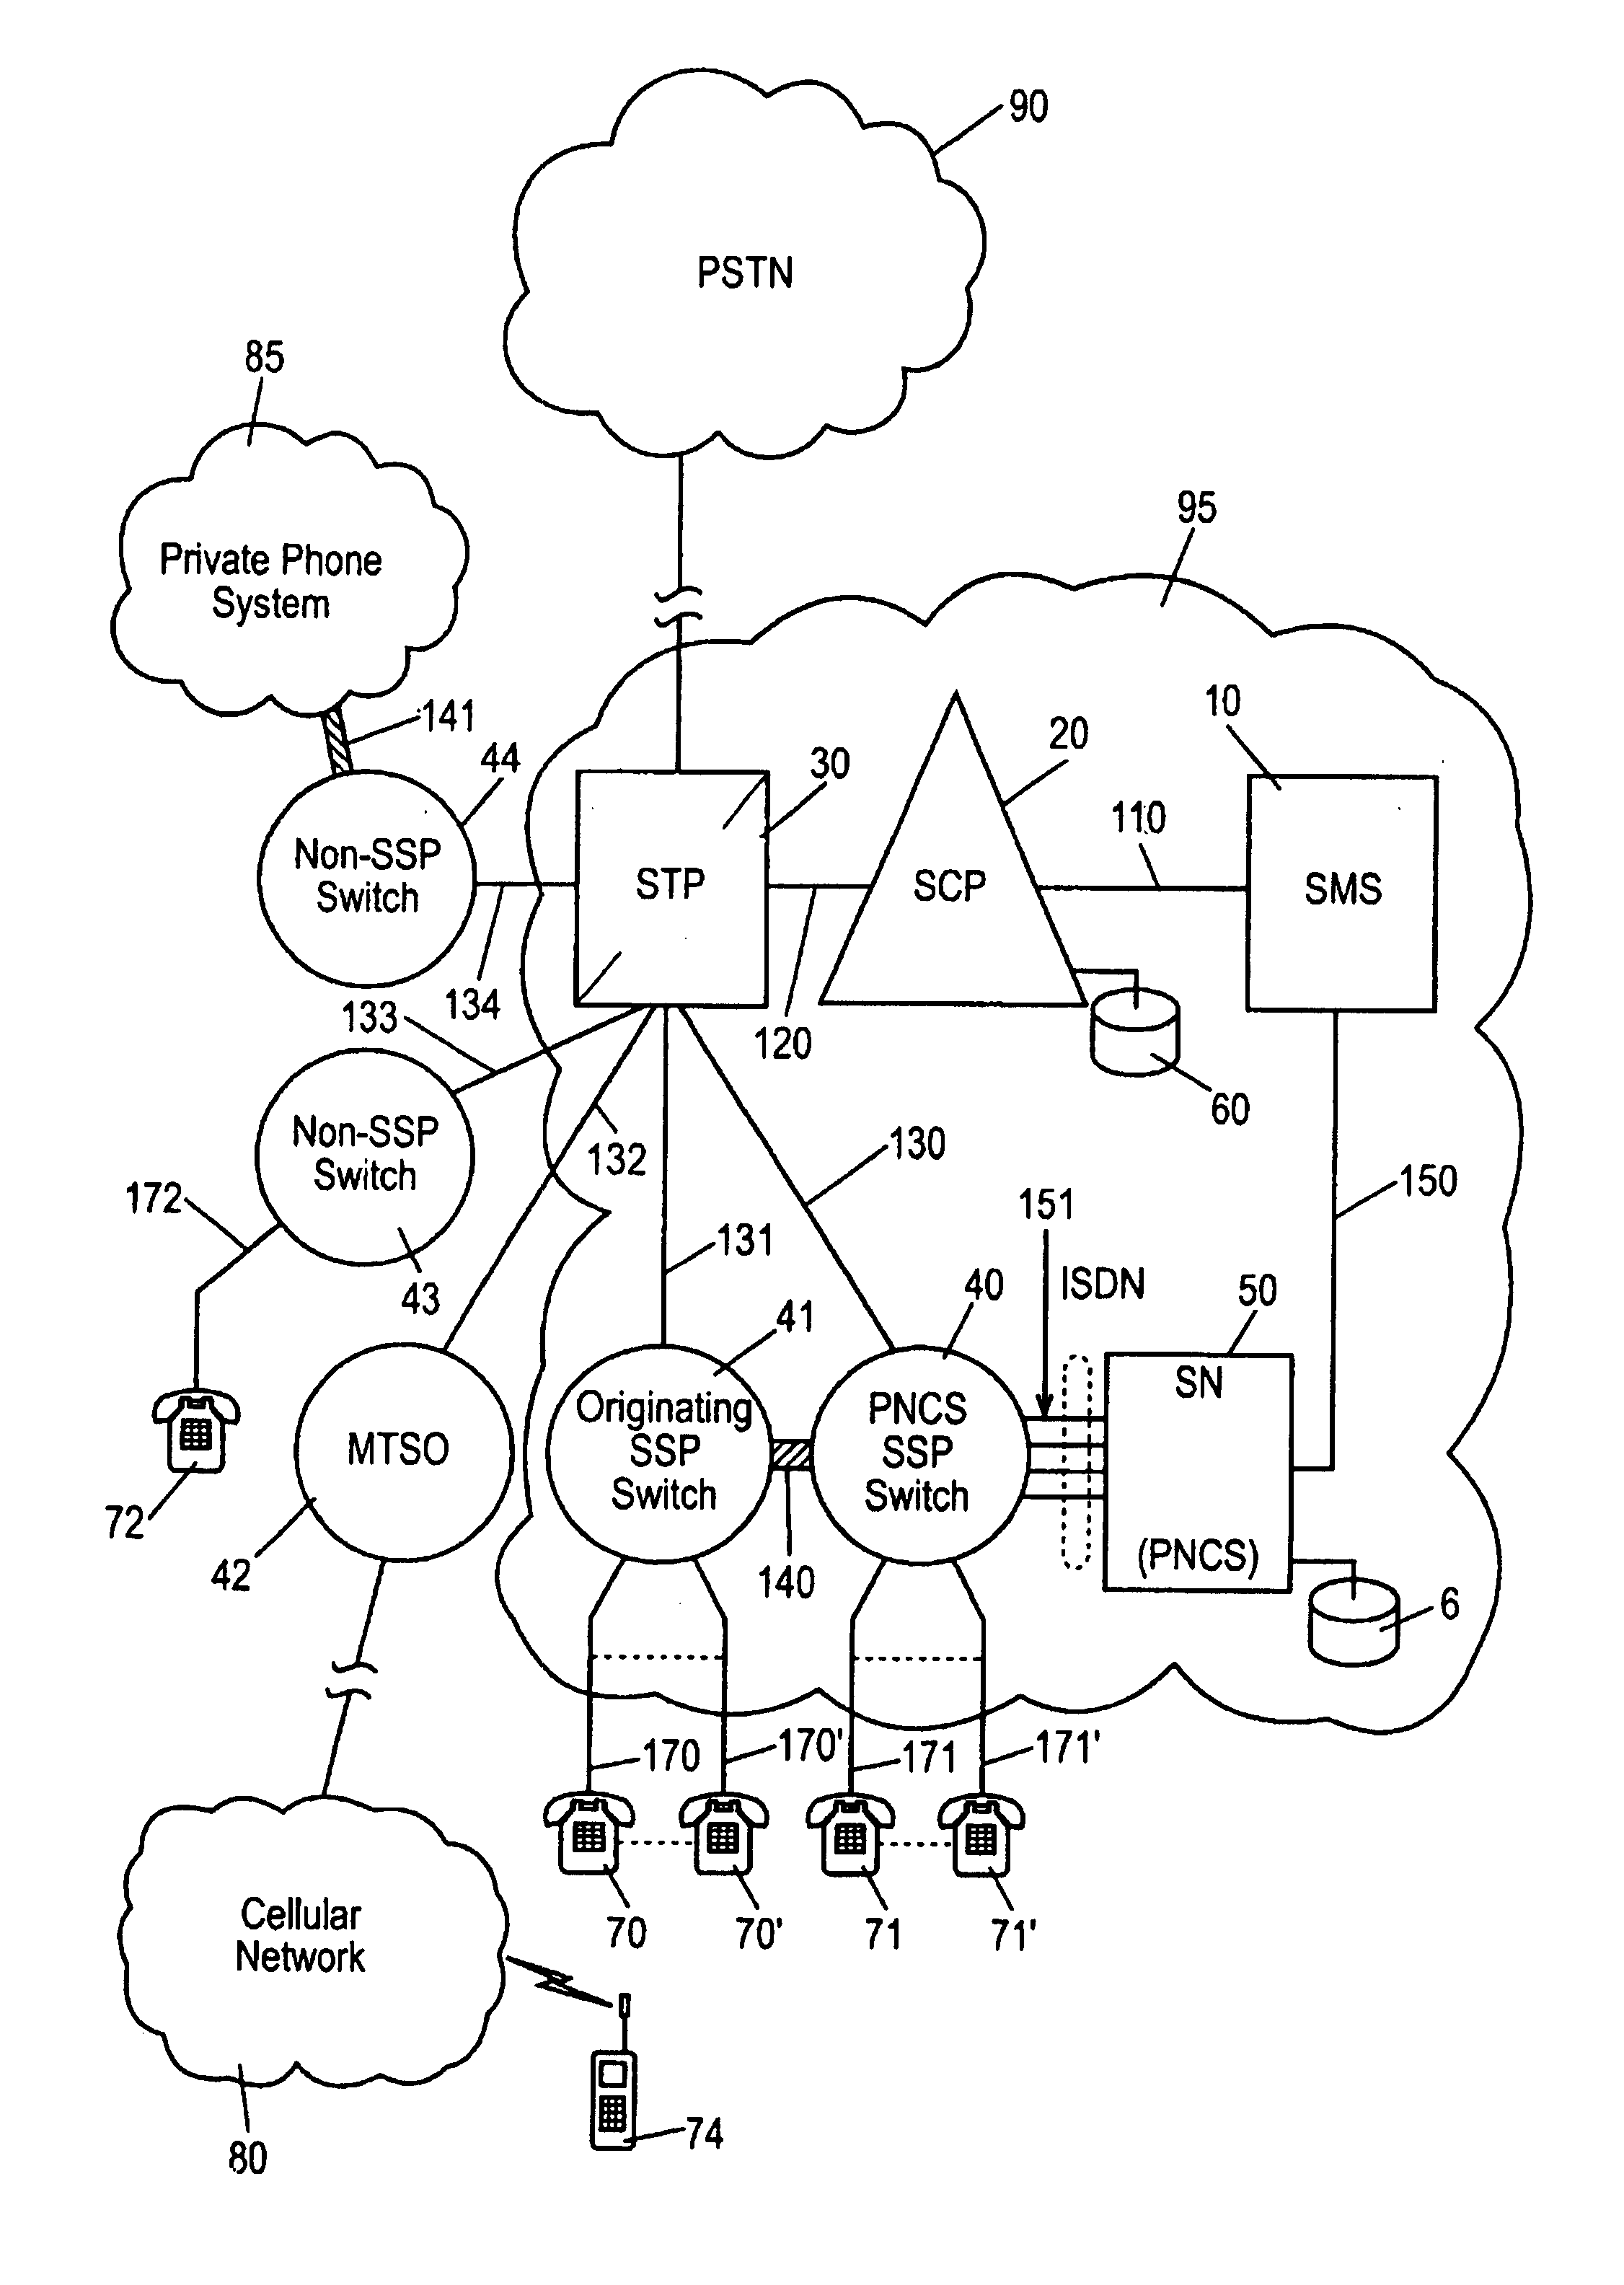 Method and apparatus for routing calls based on identification of the calling party or calling line